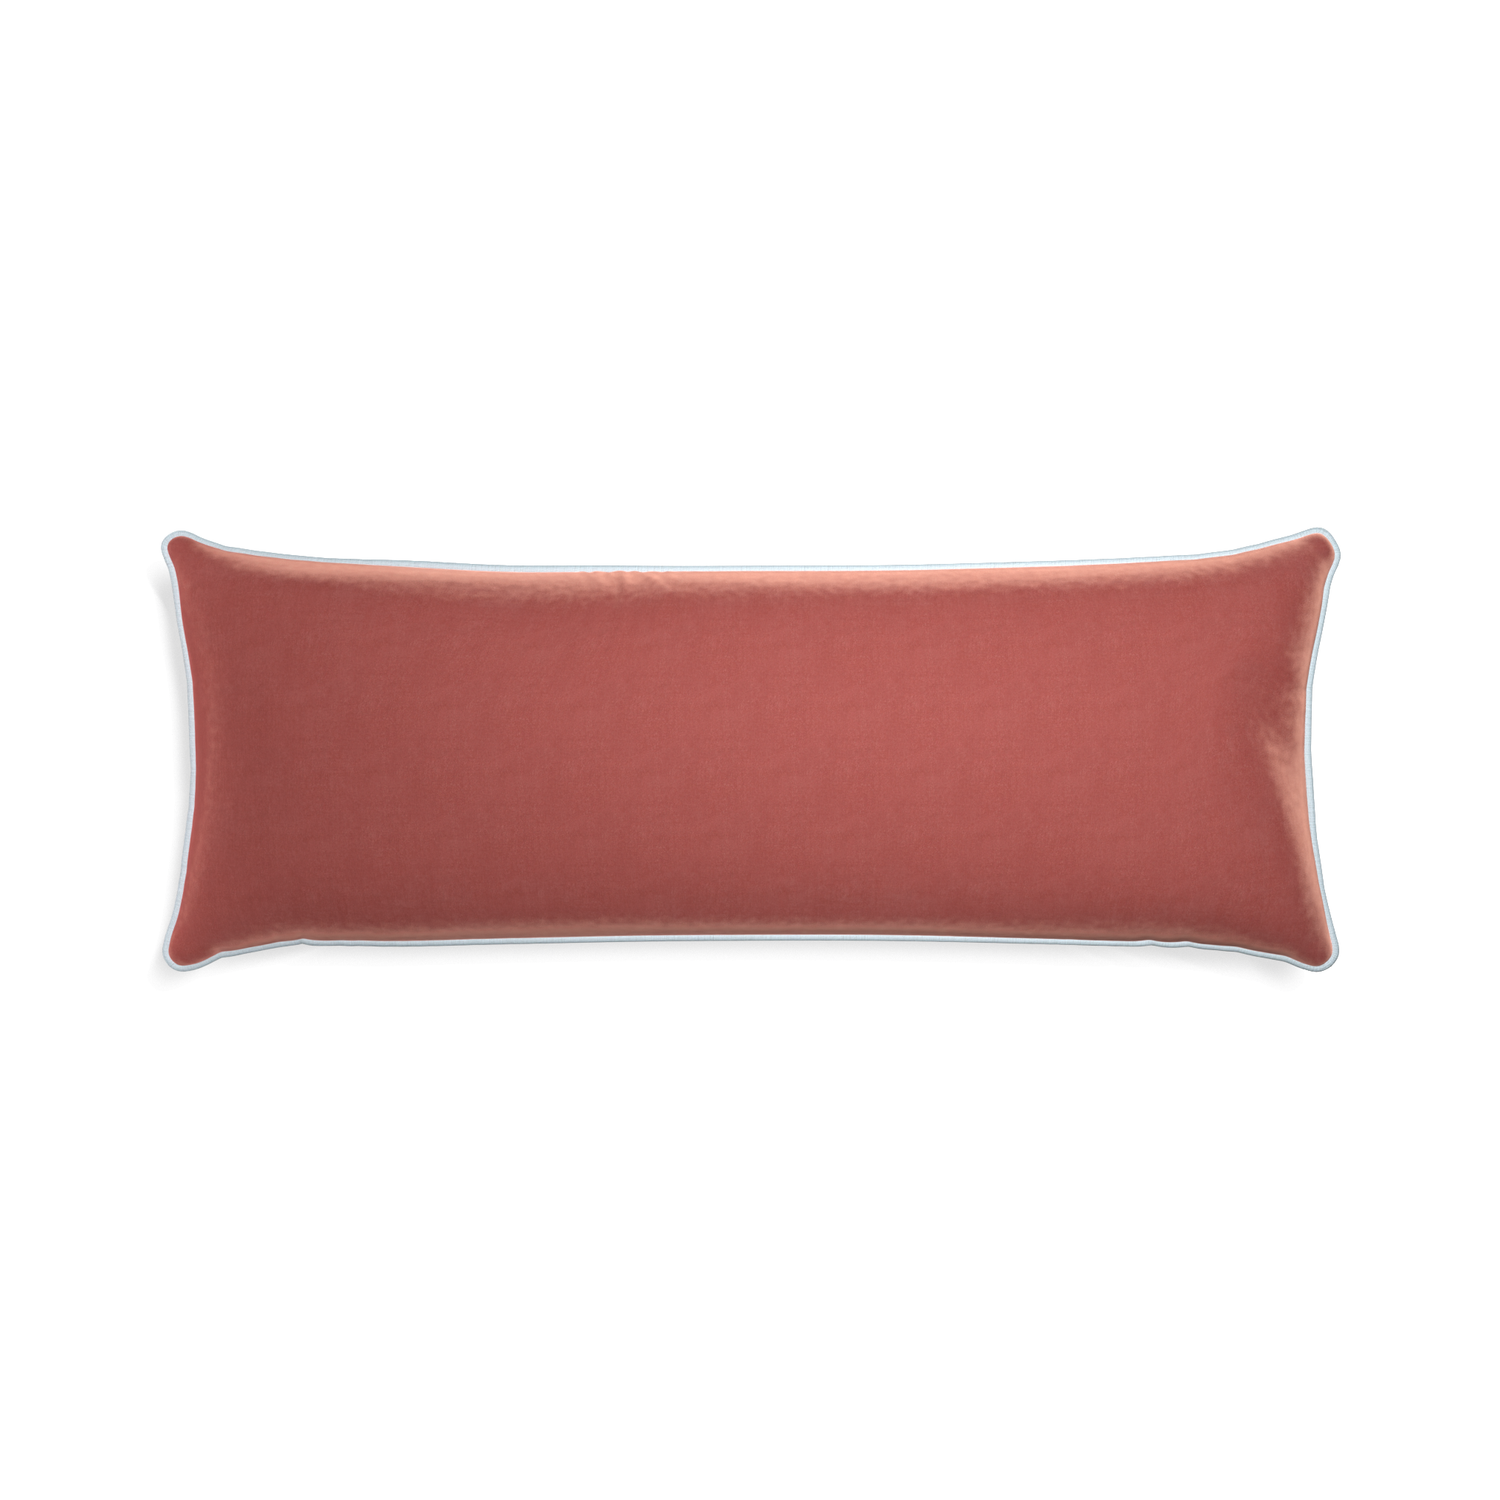 Xl-lumbar cosmo velvet custom coralpillow with powder piping on white background